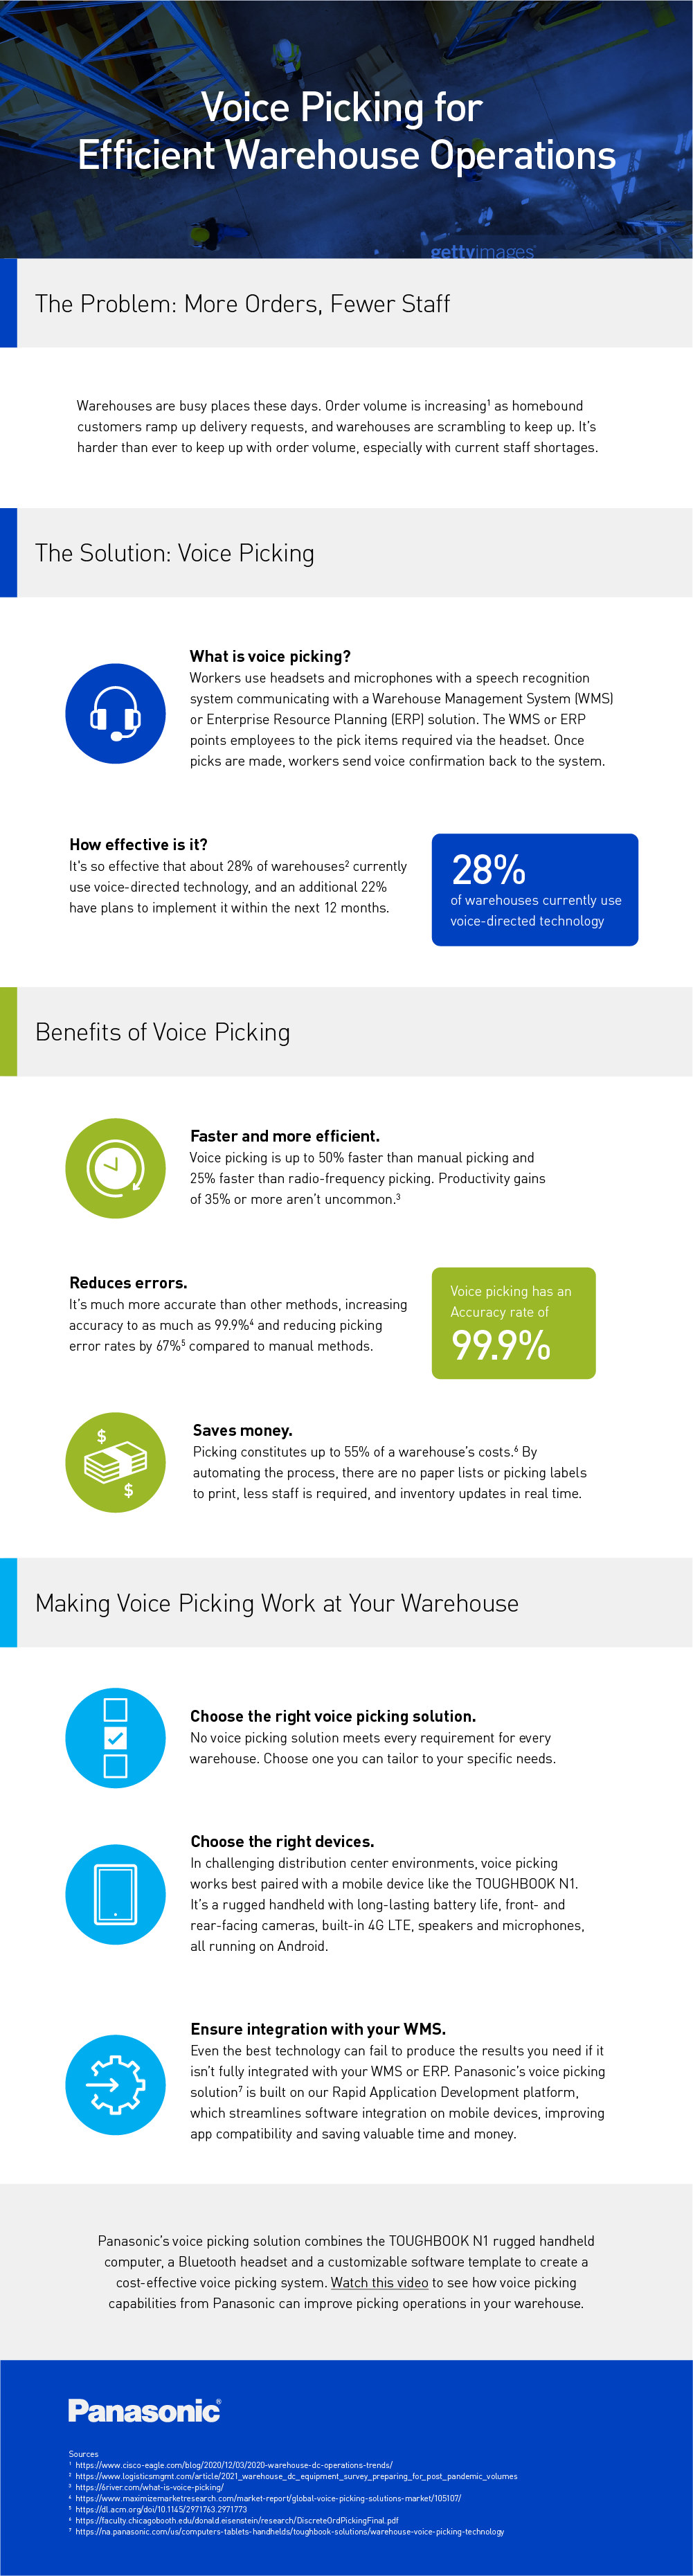 PanasonicMobility_VoicePicking_Infographic_v2_2.9.21-01.png